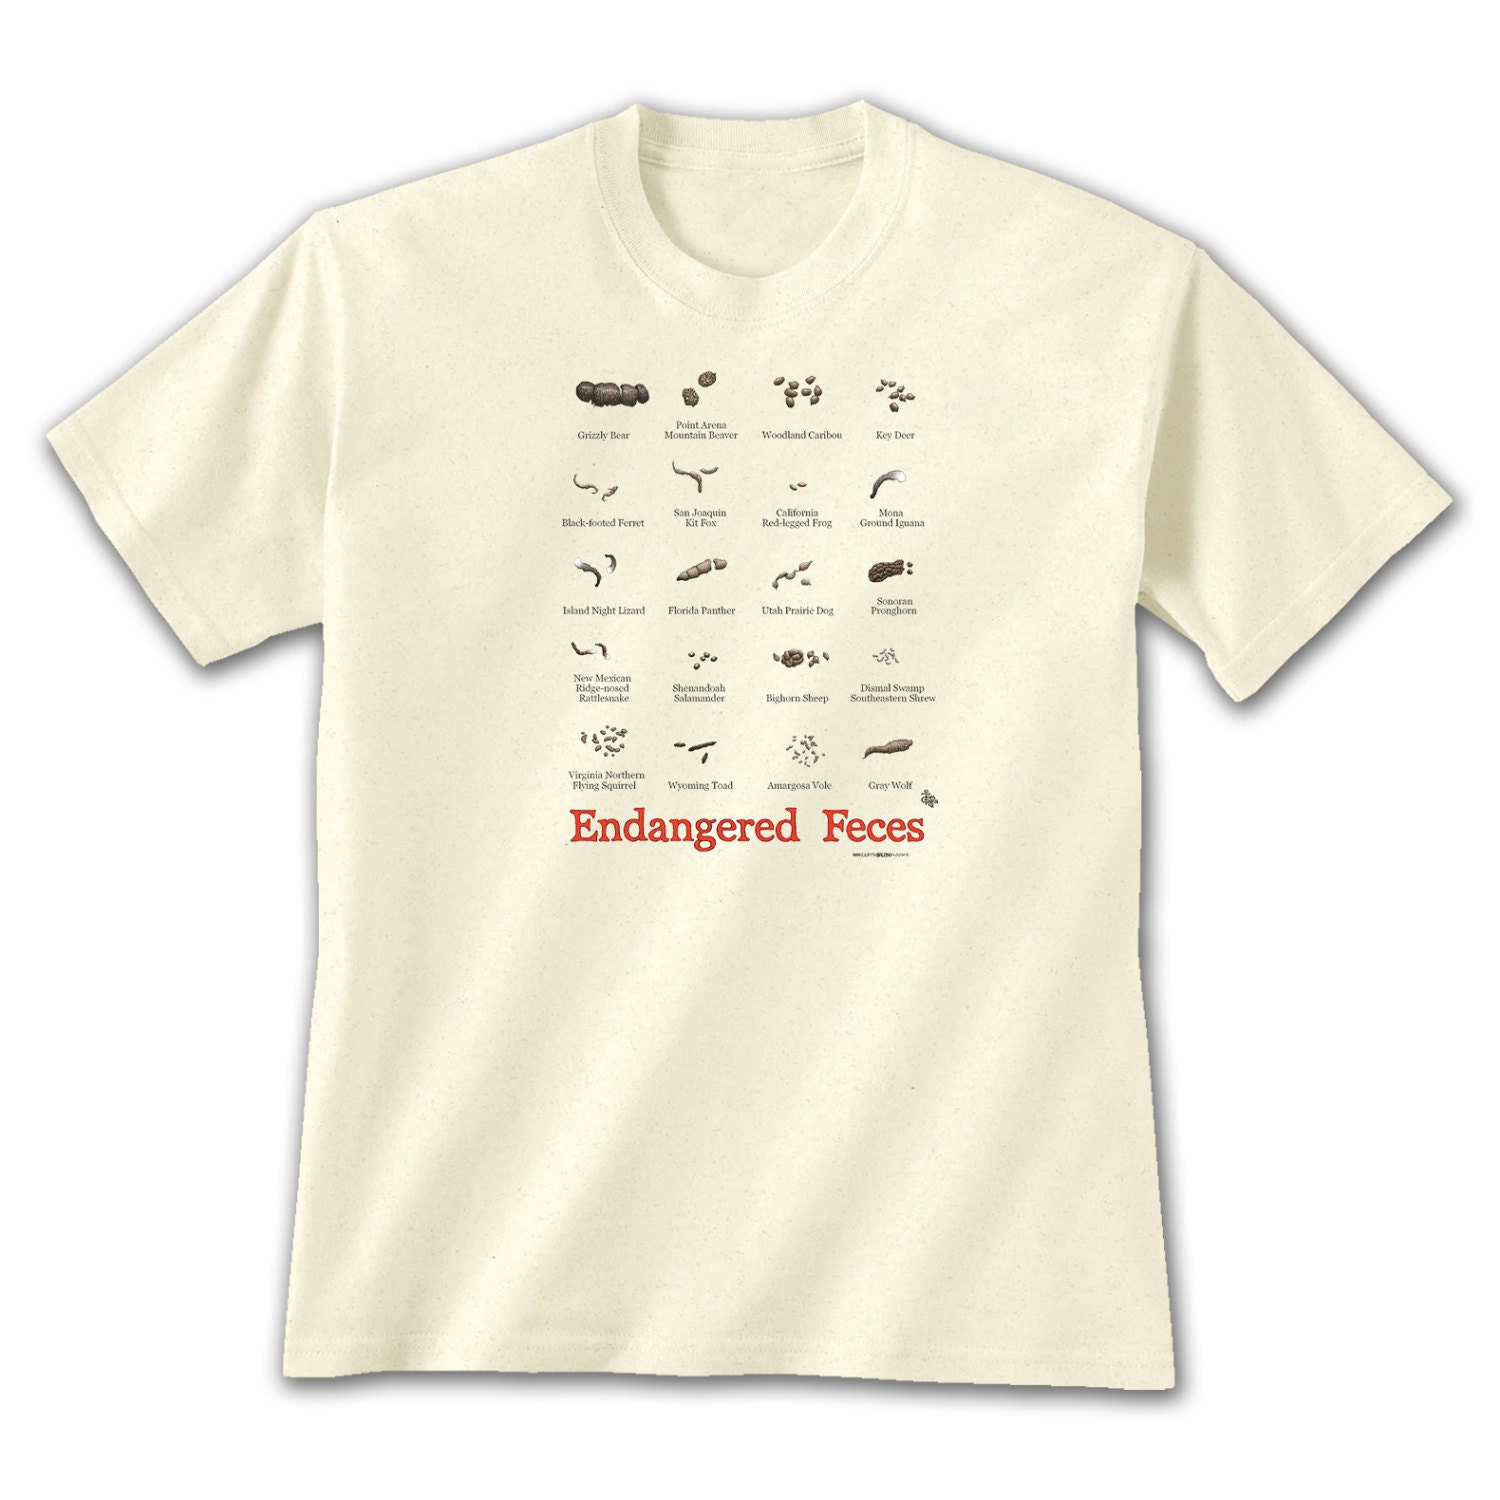 Endangered Feces T-Shirt Humor and Scientific Accuracy Outdoor1500 x 1500